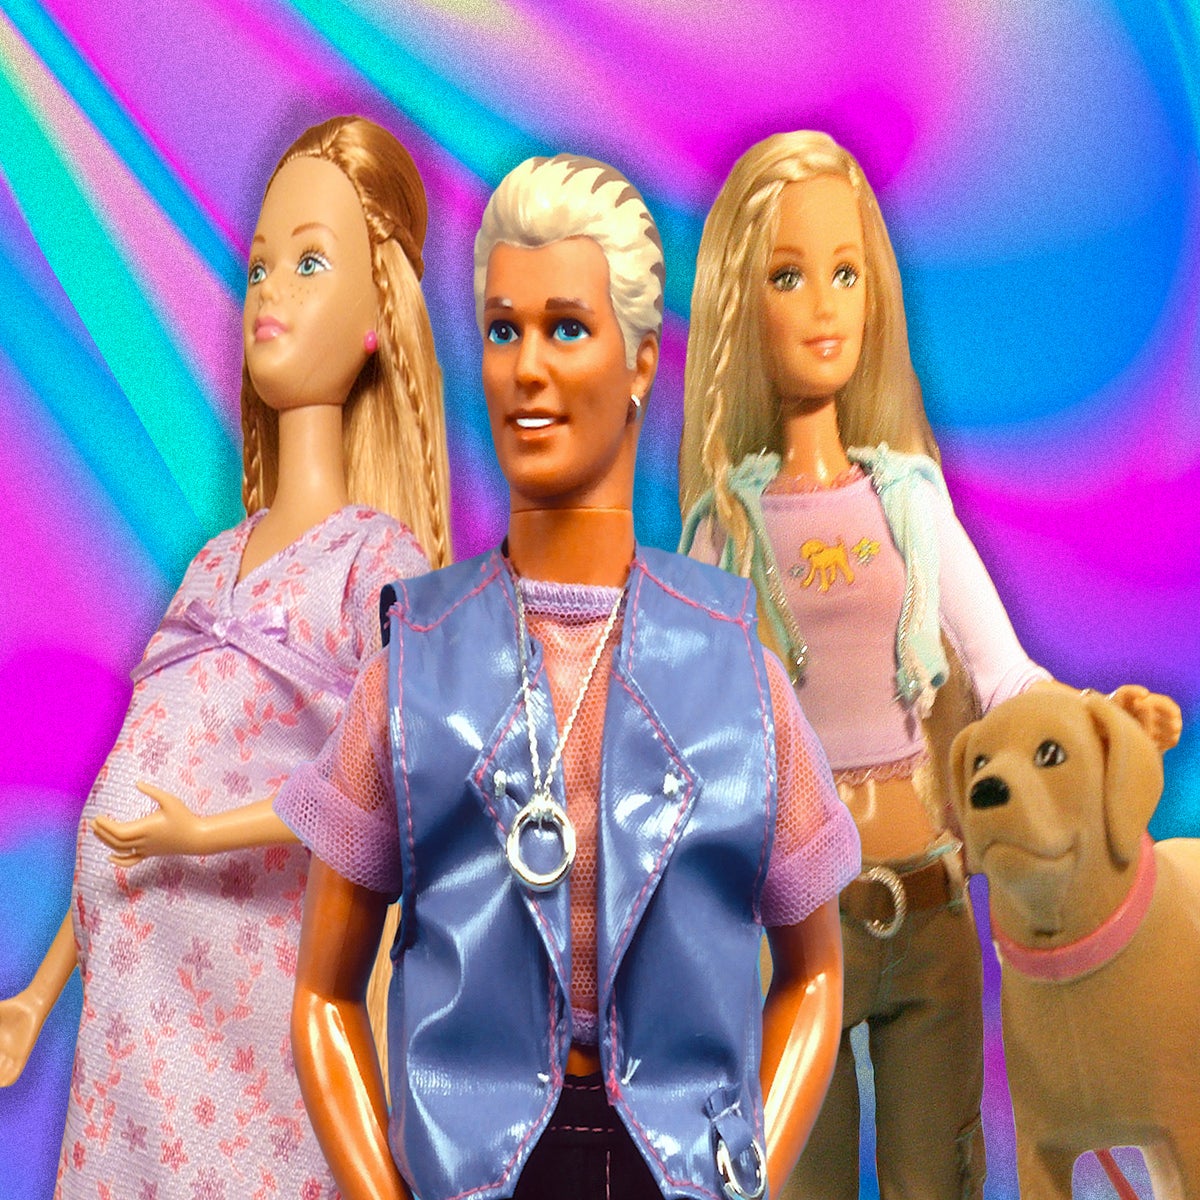 Mattel is Releasing 'Weird Barbie' and I Couldn't Be More Excited